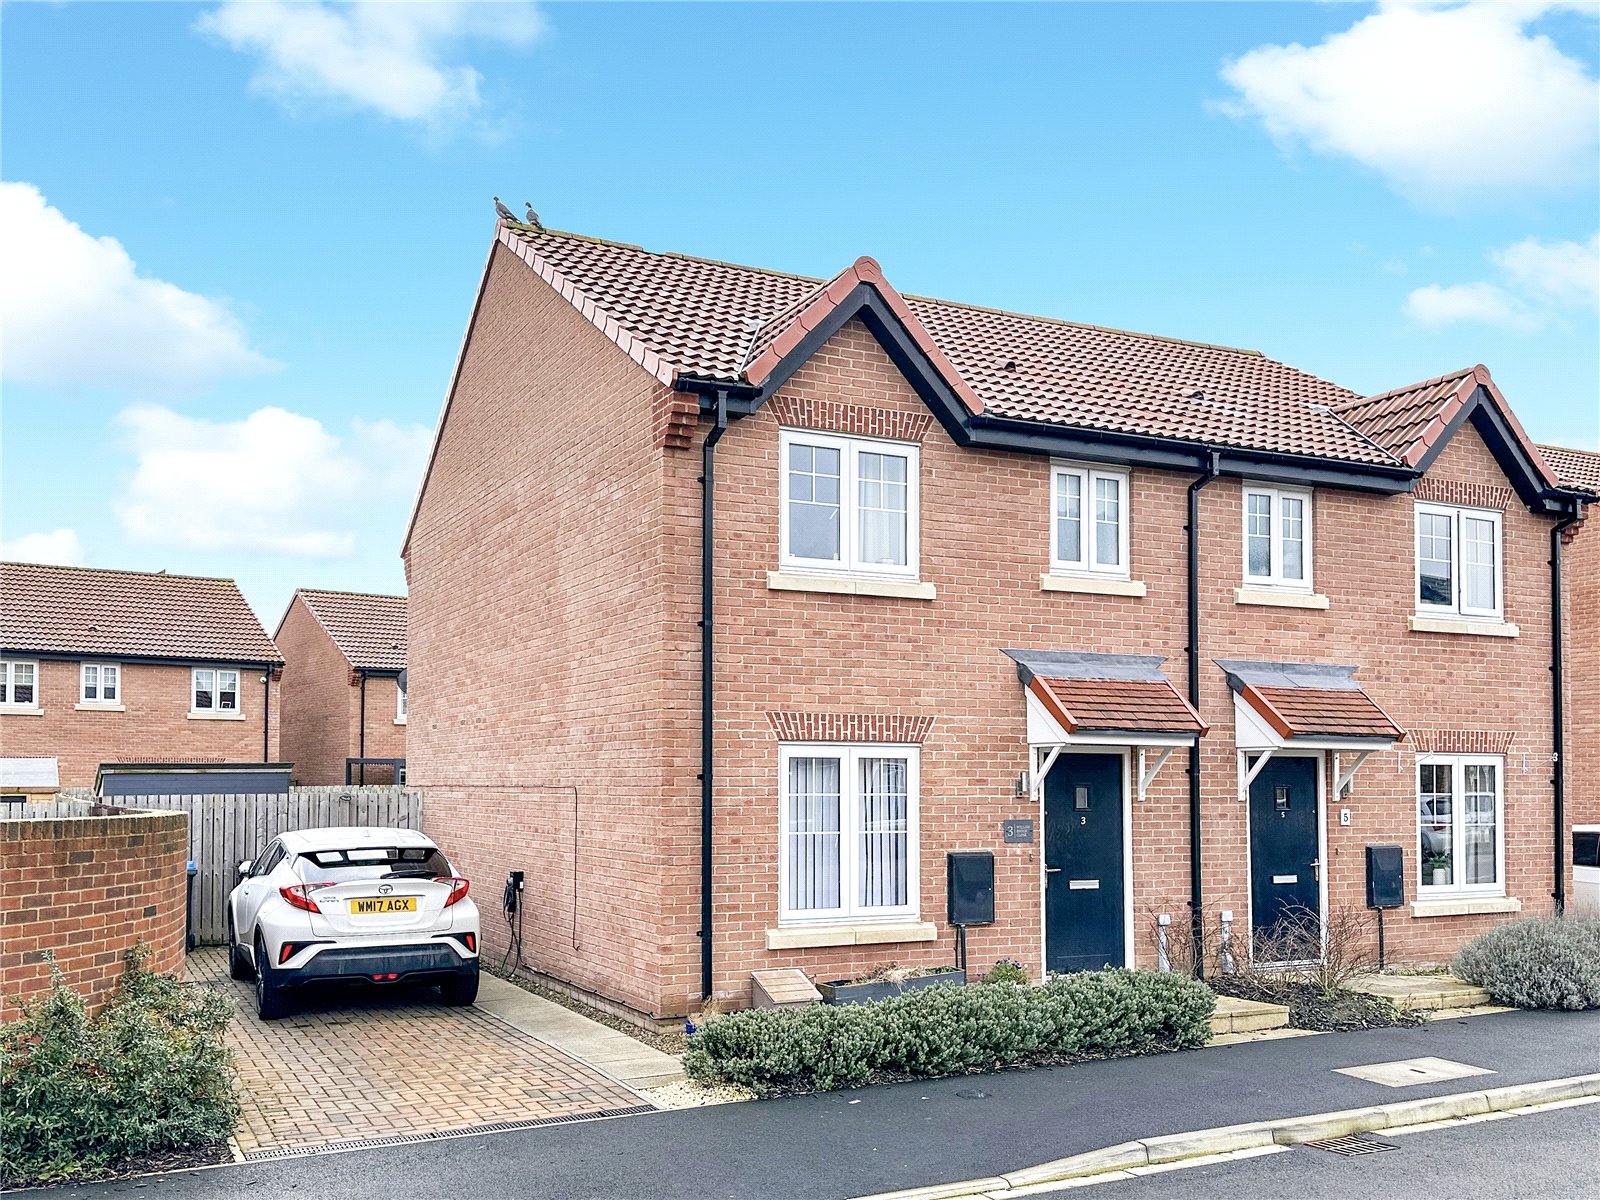 3 bed house for sale in Willow Brook Close, Stokesley - Property Image 1